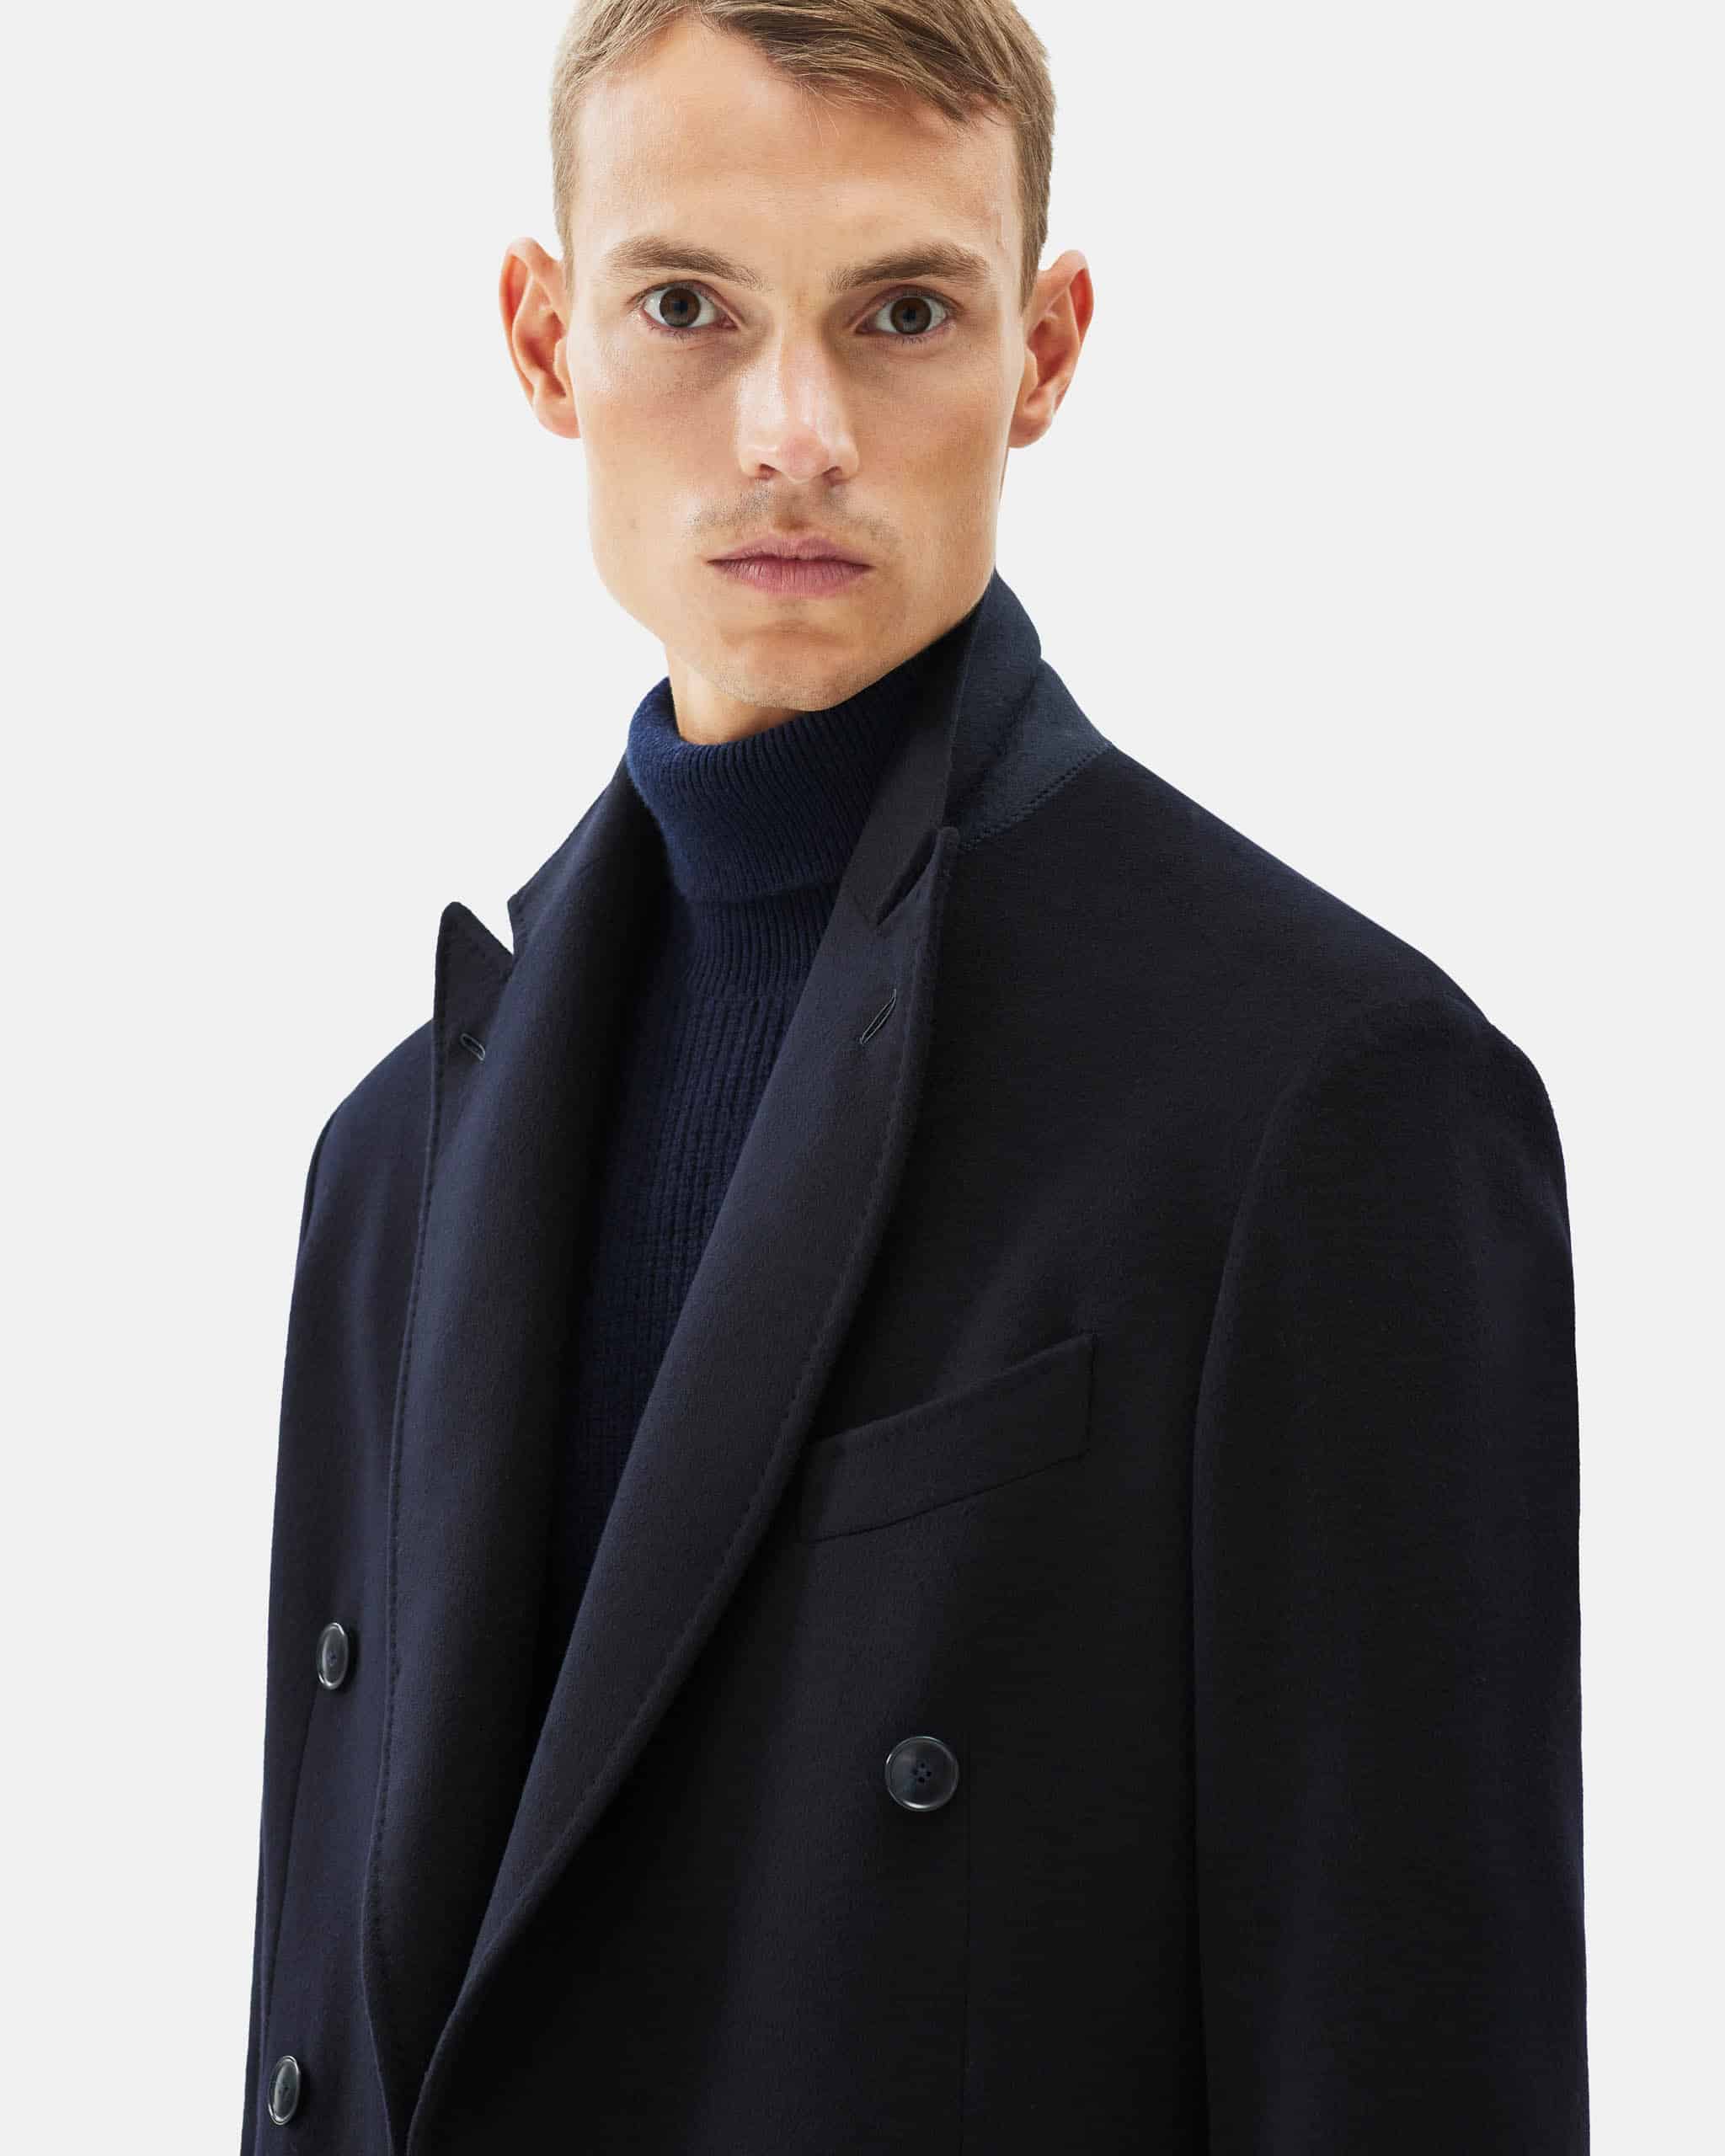 Overcoat pure Mongolian cashmere midnight blue image 3